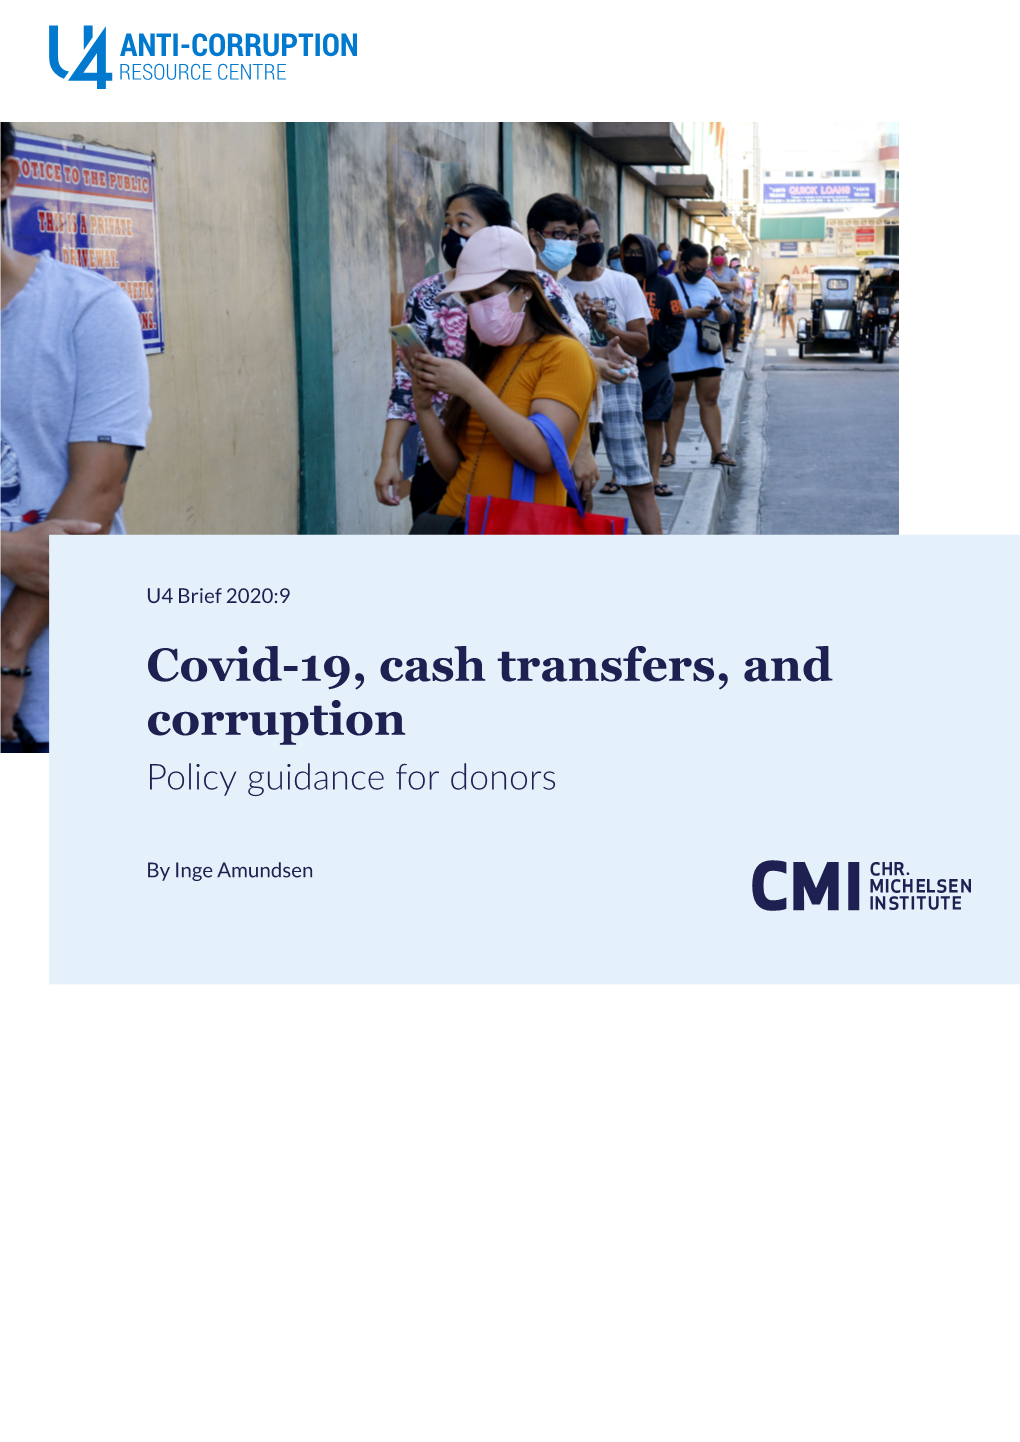 Covid-19, Cash Transfers, and Corruption Policy Guidance for Donors